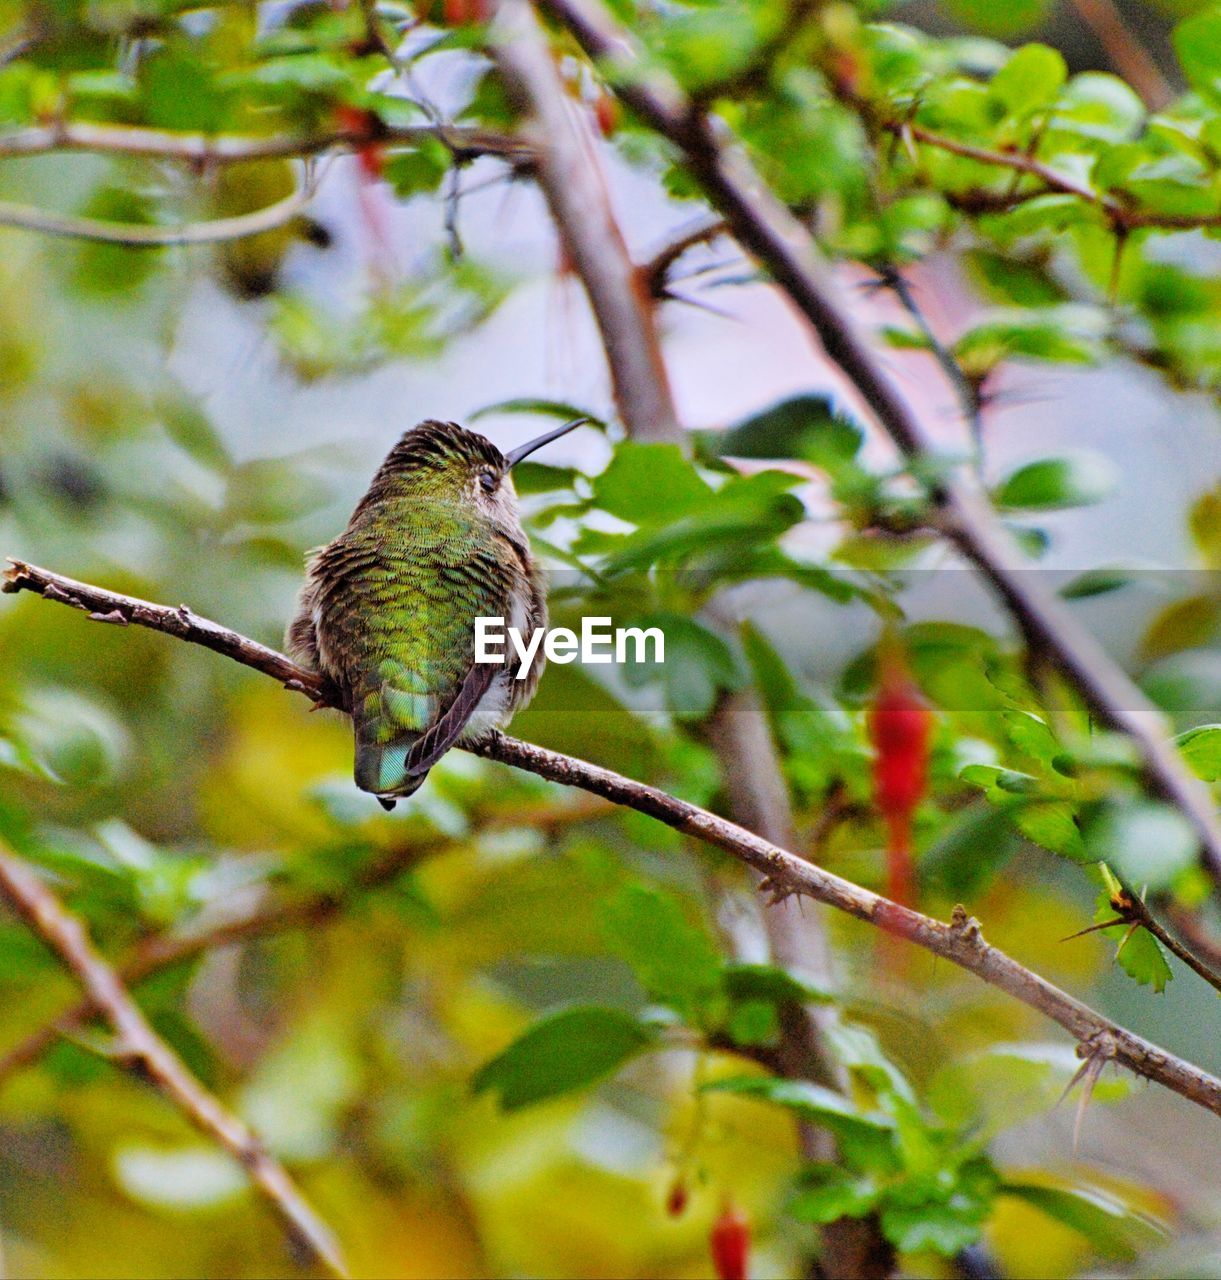 animal themes, animal, animal wildlife, wildlife, bird, tree, plant, one animal, branch, nature, perching, leaf, plant part, no people, green, flower, beauty in nature, outdoors, hummingbird, selective focus, day, environment